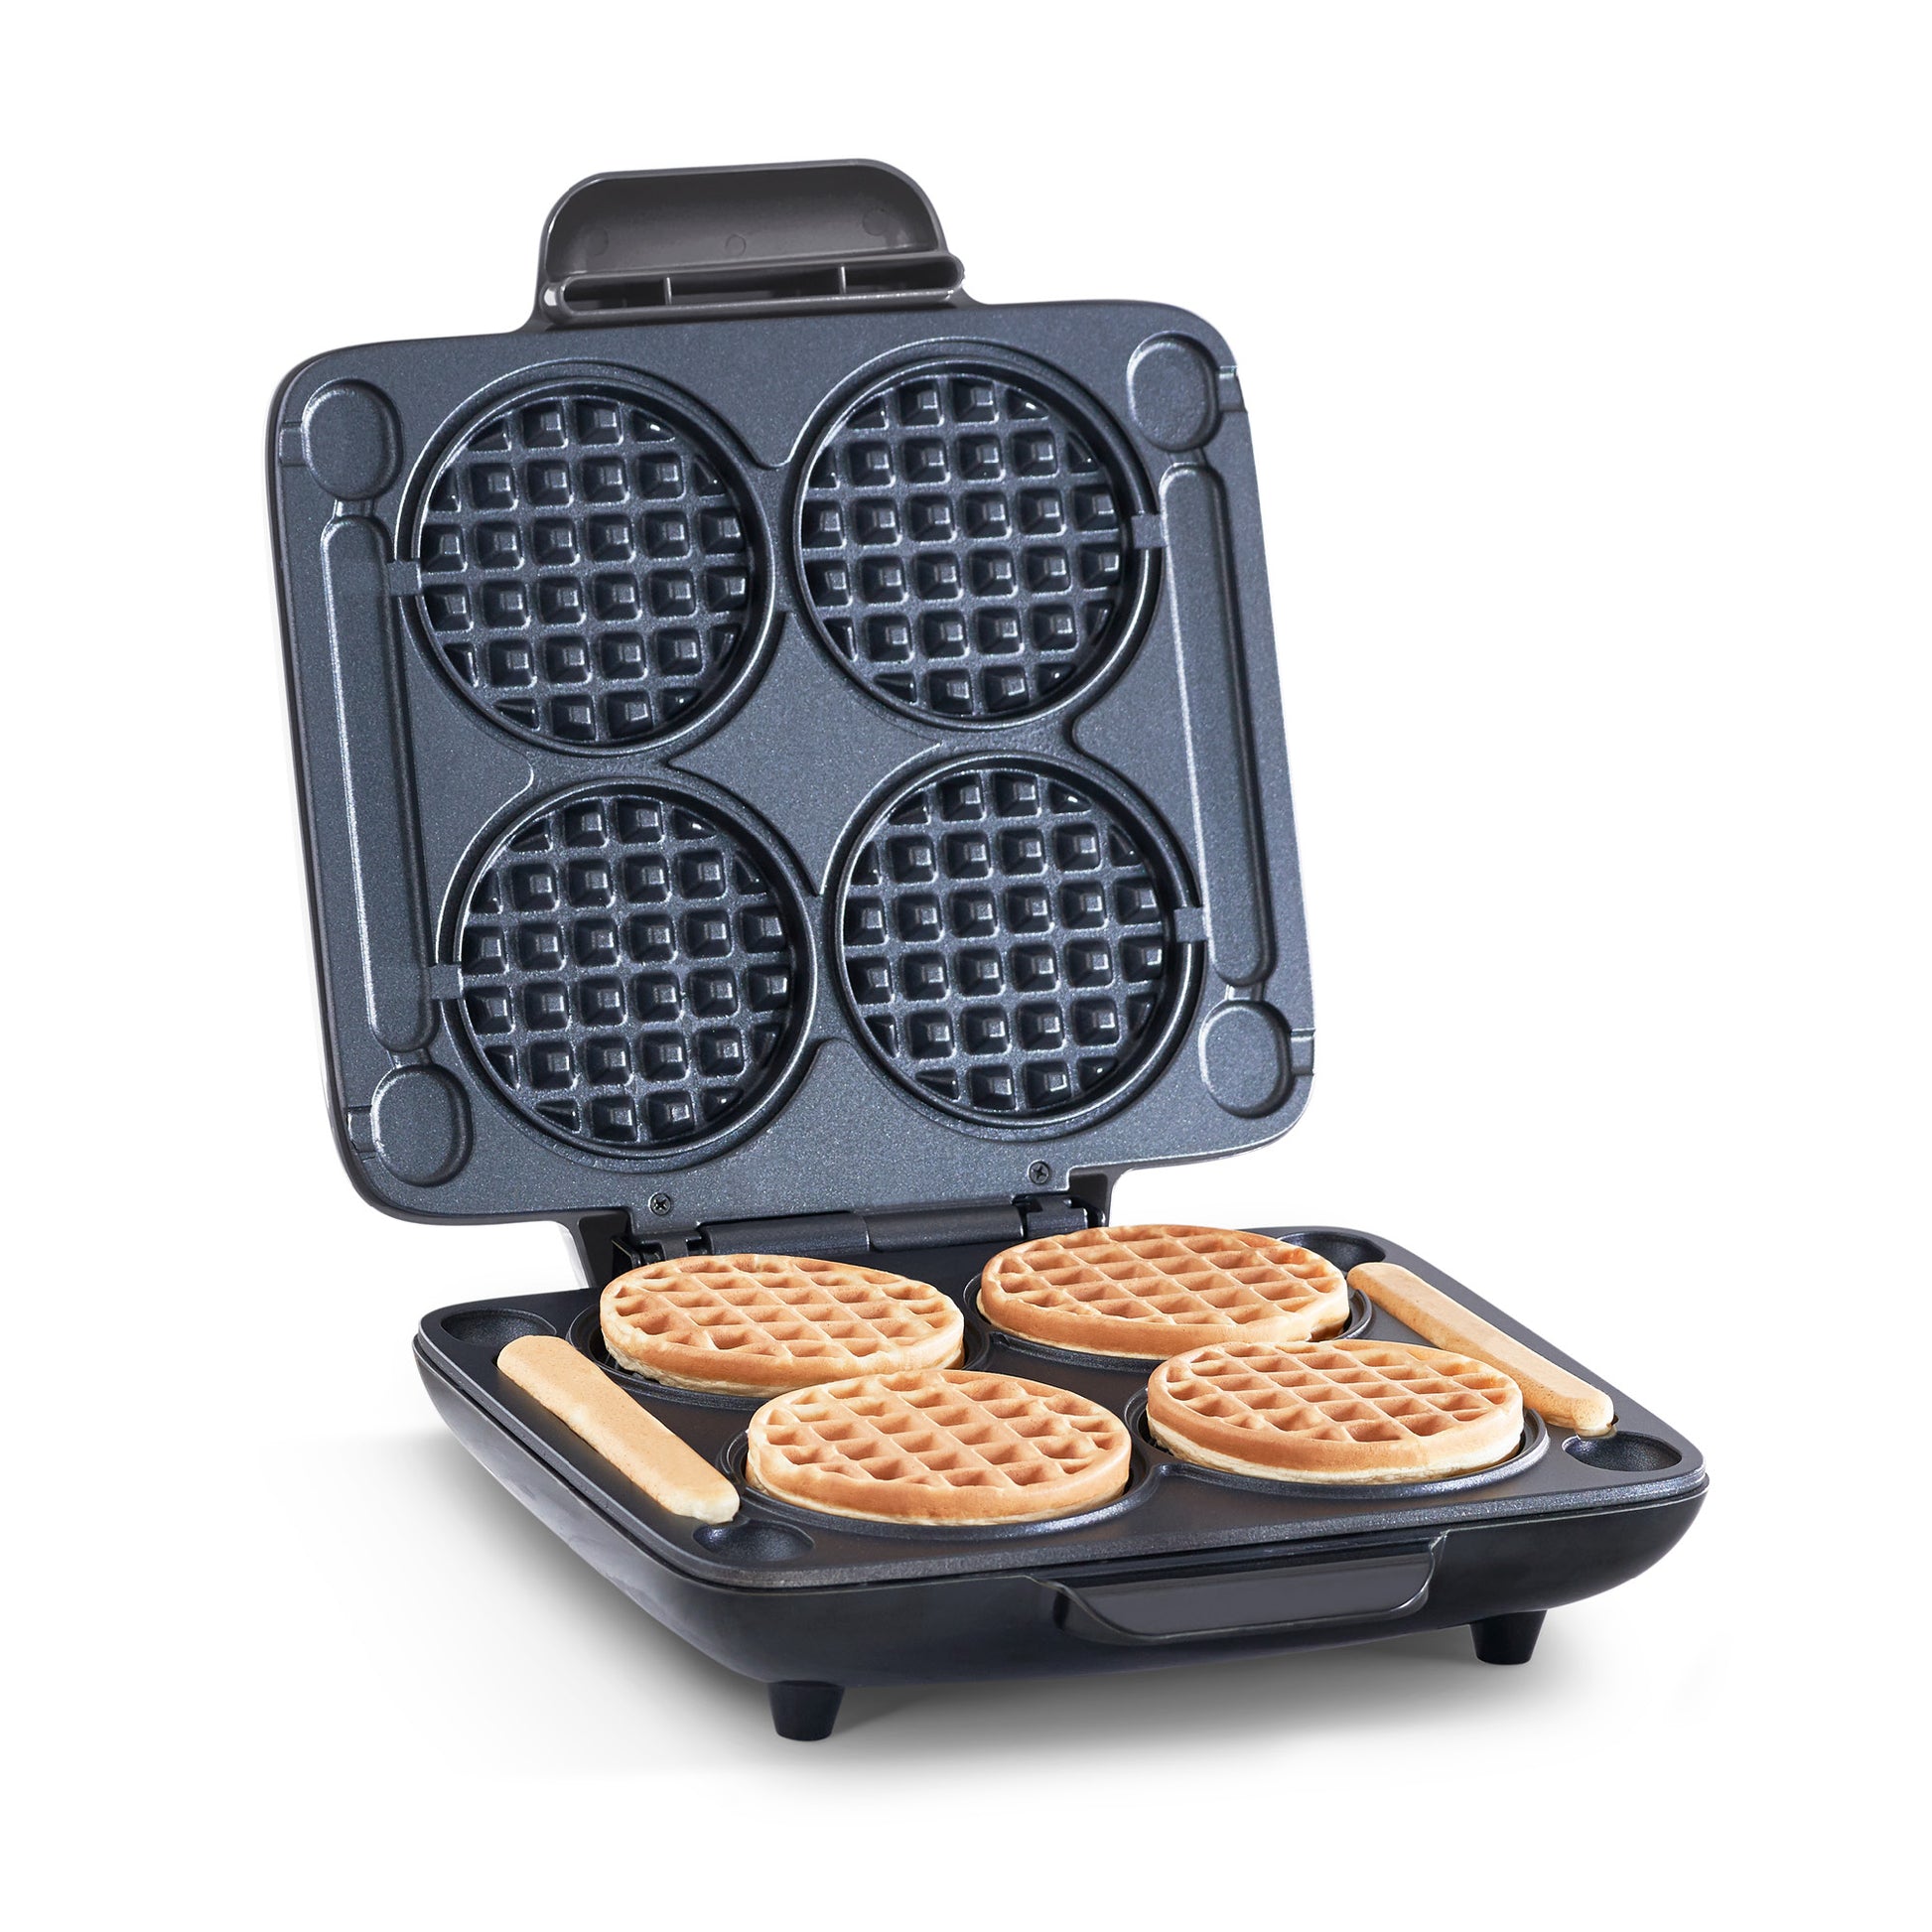 Mini Waffle Maker, Waffle Iron, Non-Stick 2-in-1 Waffle Machine with  Removable Plates, Belgian Waffle Maker with Easy to Clean, Black